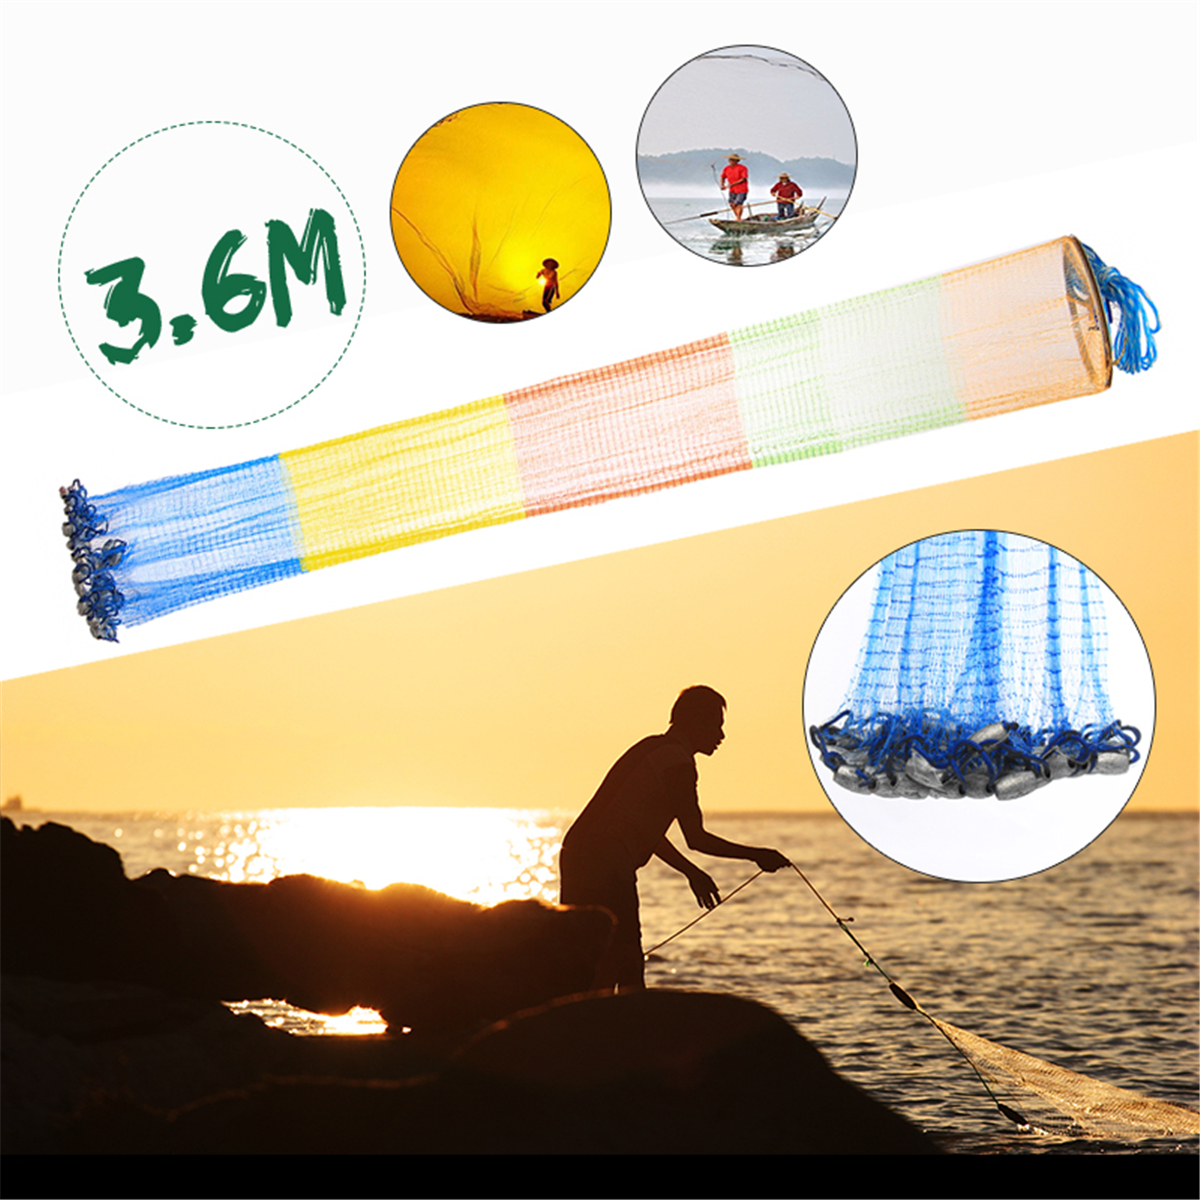 

ZANLURE 3.6m 12FT Colorful Throw Hand Cast Fishing Net Spin Network Bait Fish Net+Sinker